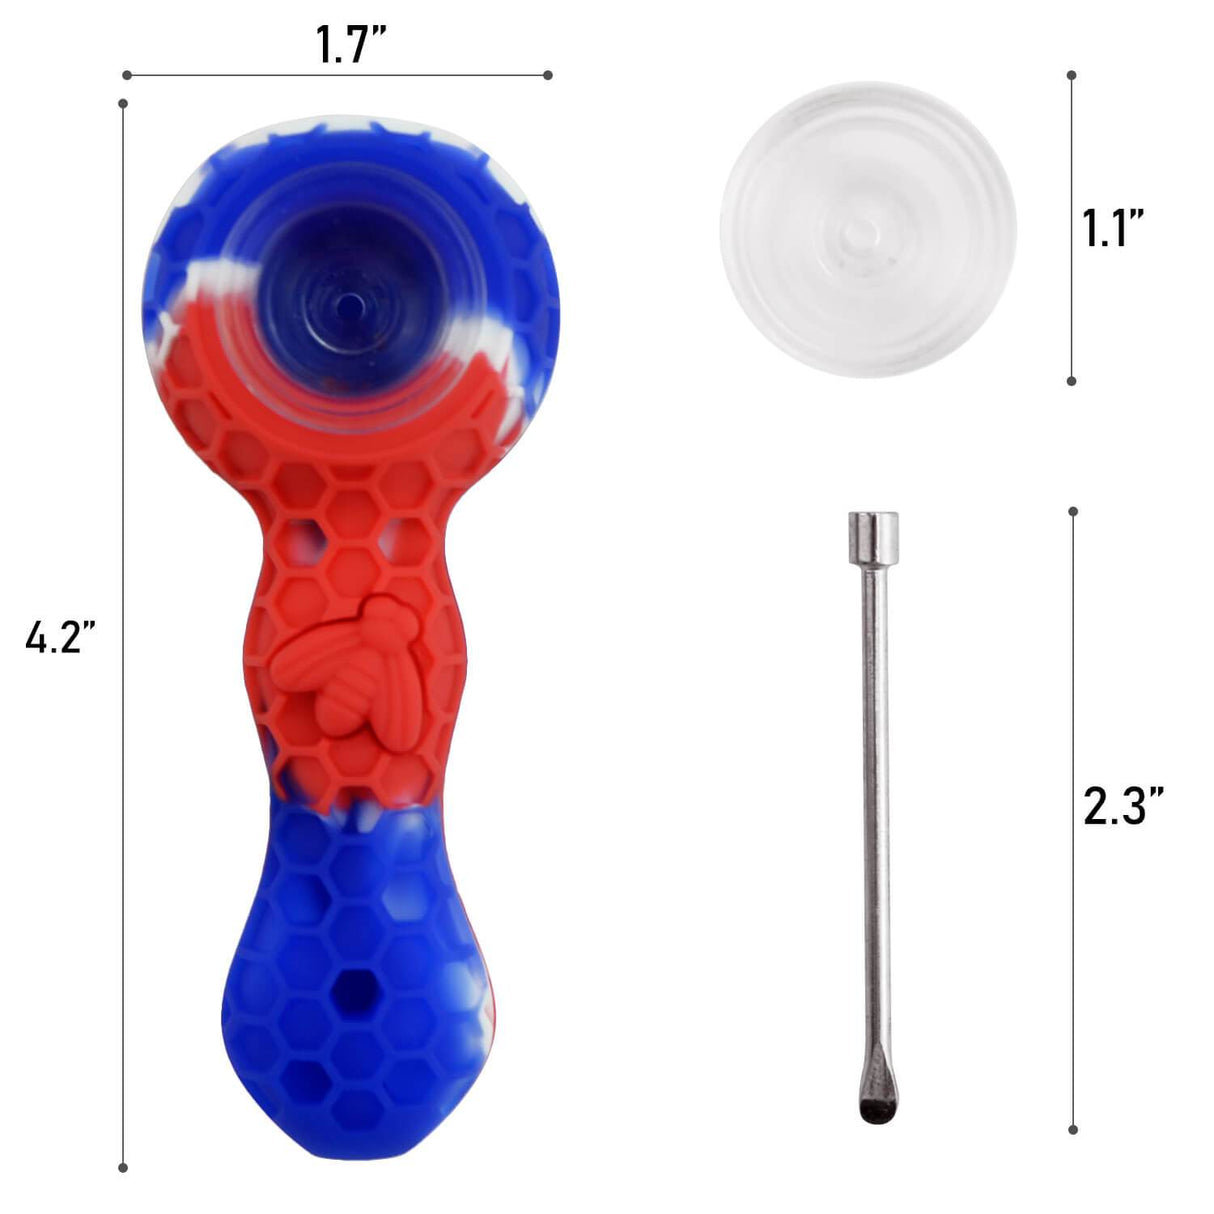 PILOT DIARY Silicone Pipe with Detachable Glass Bowl, Red and Blue, Top View